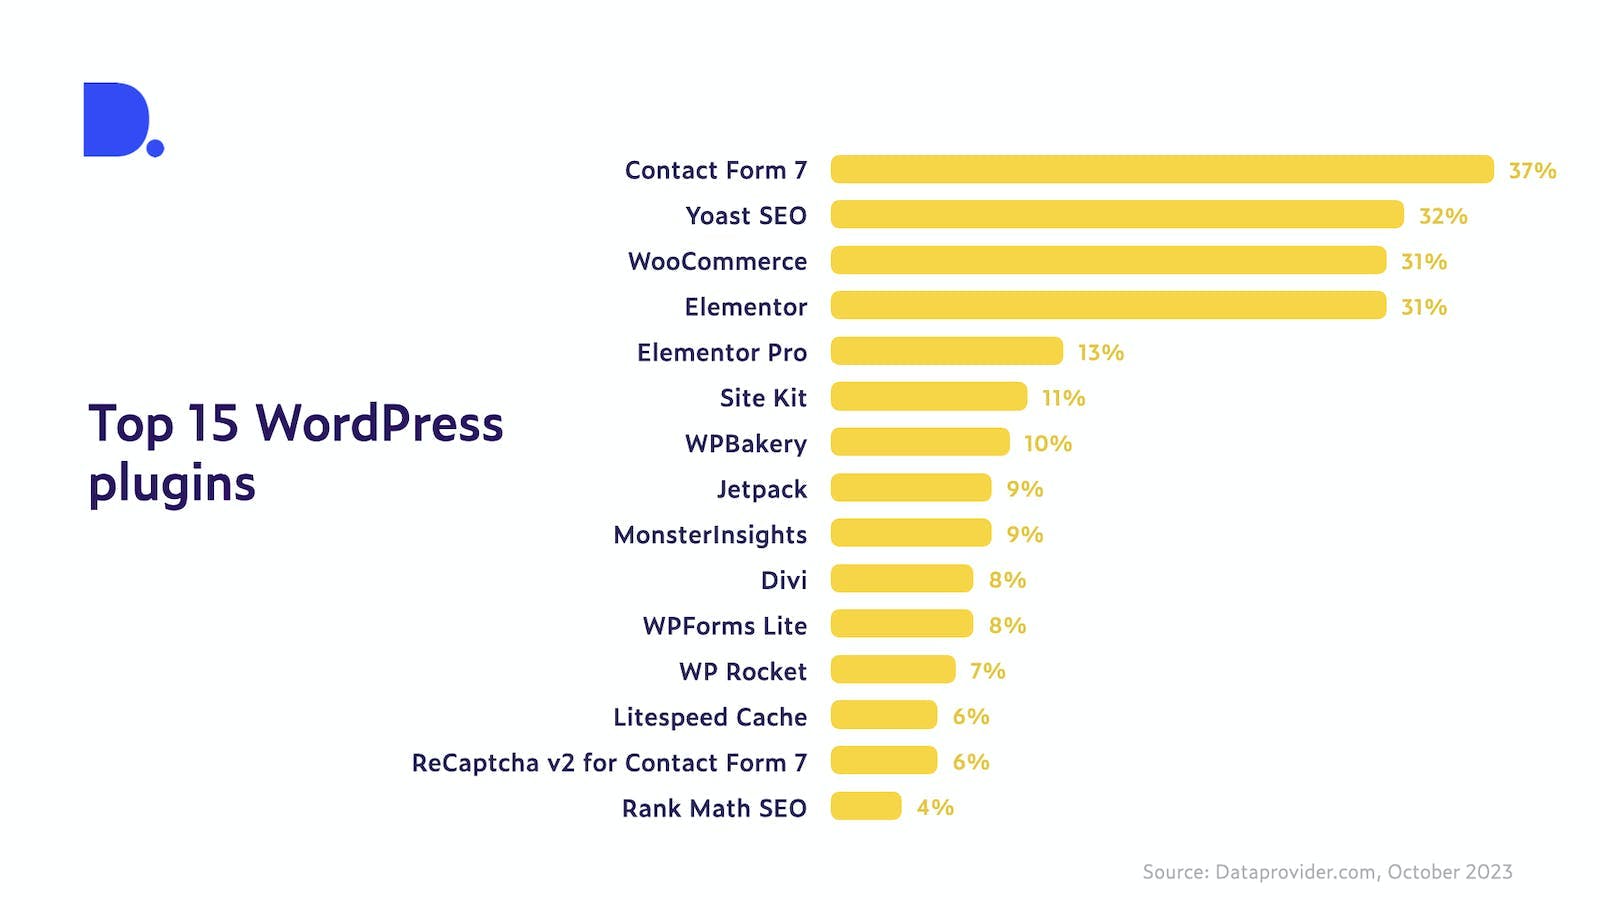 Alt text: Bar chart showing the top 15 WordPress plugins used by websites. They are ranked as follows: 1. Contact Form 7 (37%), 2. Yoast SEO (32%), 3. WooCommerce (31%), 4. Elementor (31%), 5. Elementor Pro (13%), 6. Site Kit (11%), 7. WPBakery (10%), 8. Jetpack (9%), 9. MonsterInsights (9%), 10. Divi (8%), 11. WPForms Lite (8%), 12. WP Rocket (7%), 13. Litespeed Cache (6%), 14. ReCaptcha v2 for Contact Form 7 (6%), 15. Rank Math SEO (4%). (Source: Dataprovider.com, October 2023)